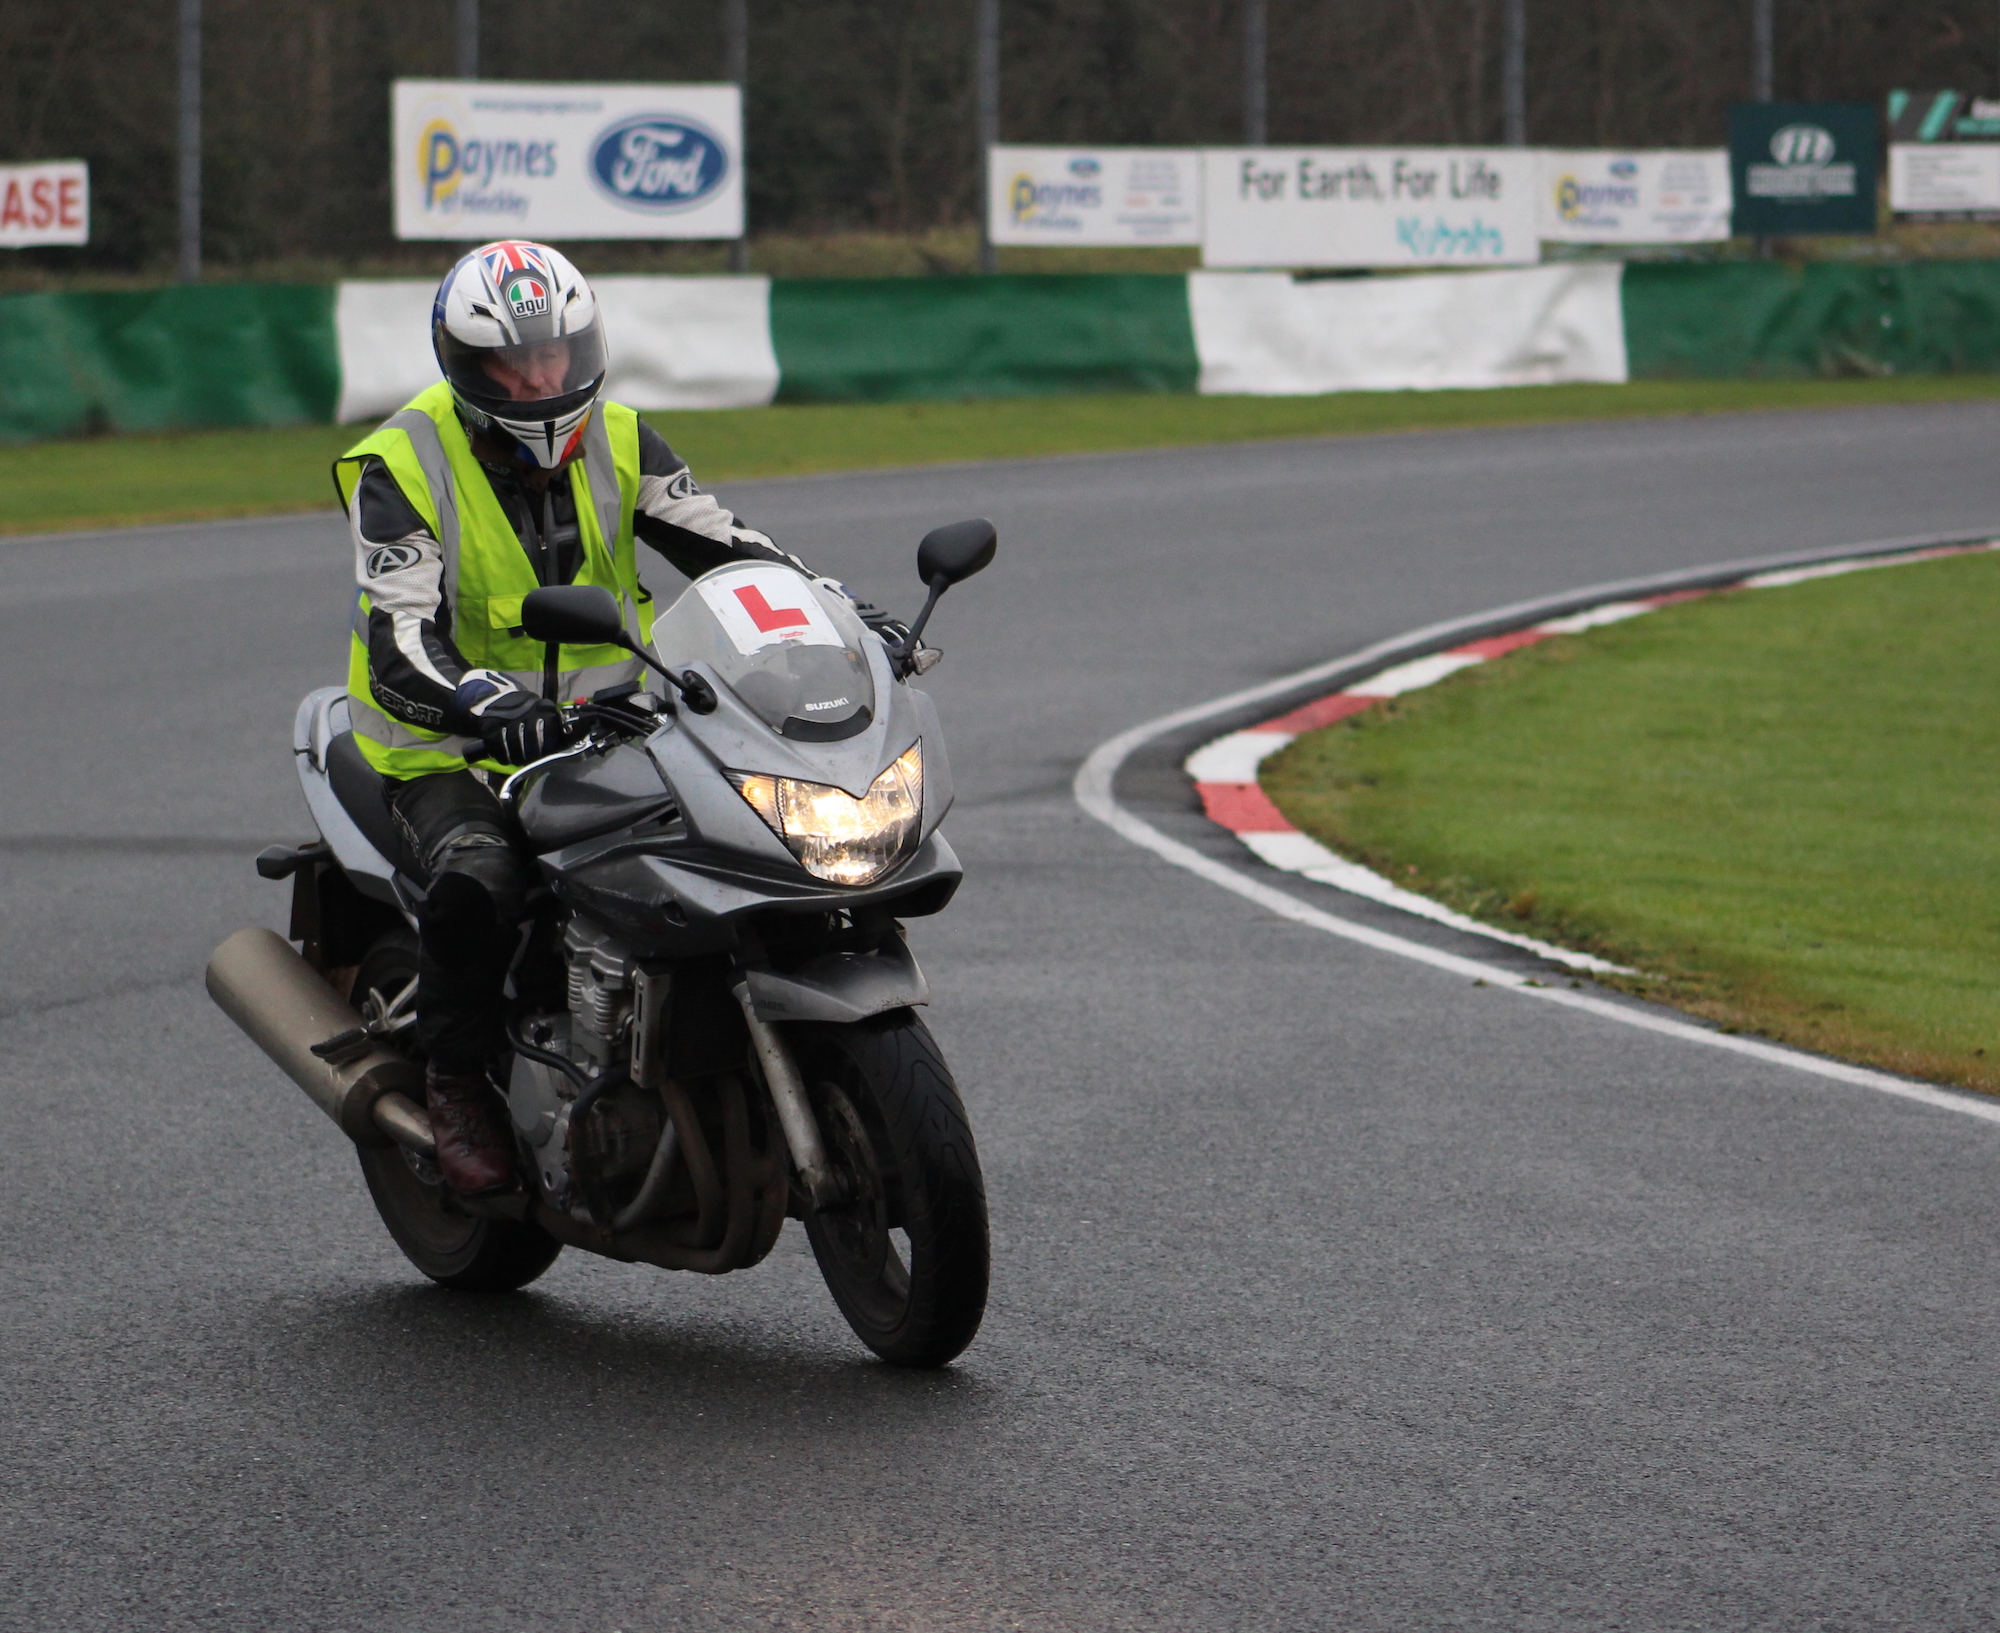 Motorcycle test at Malloy Park, Leicester